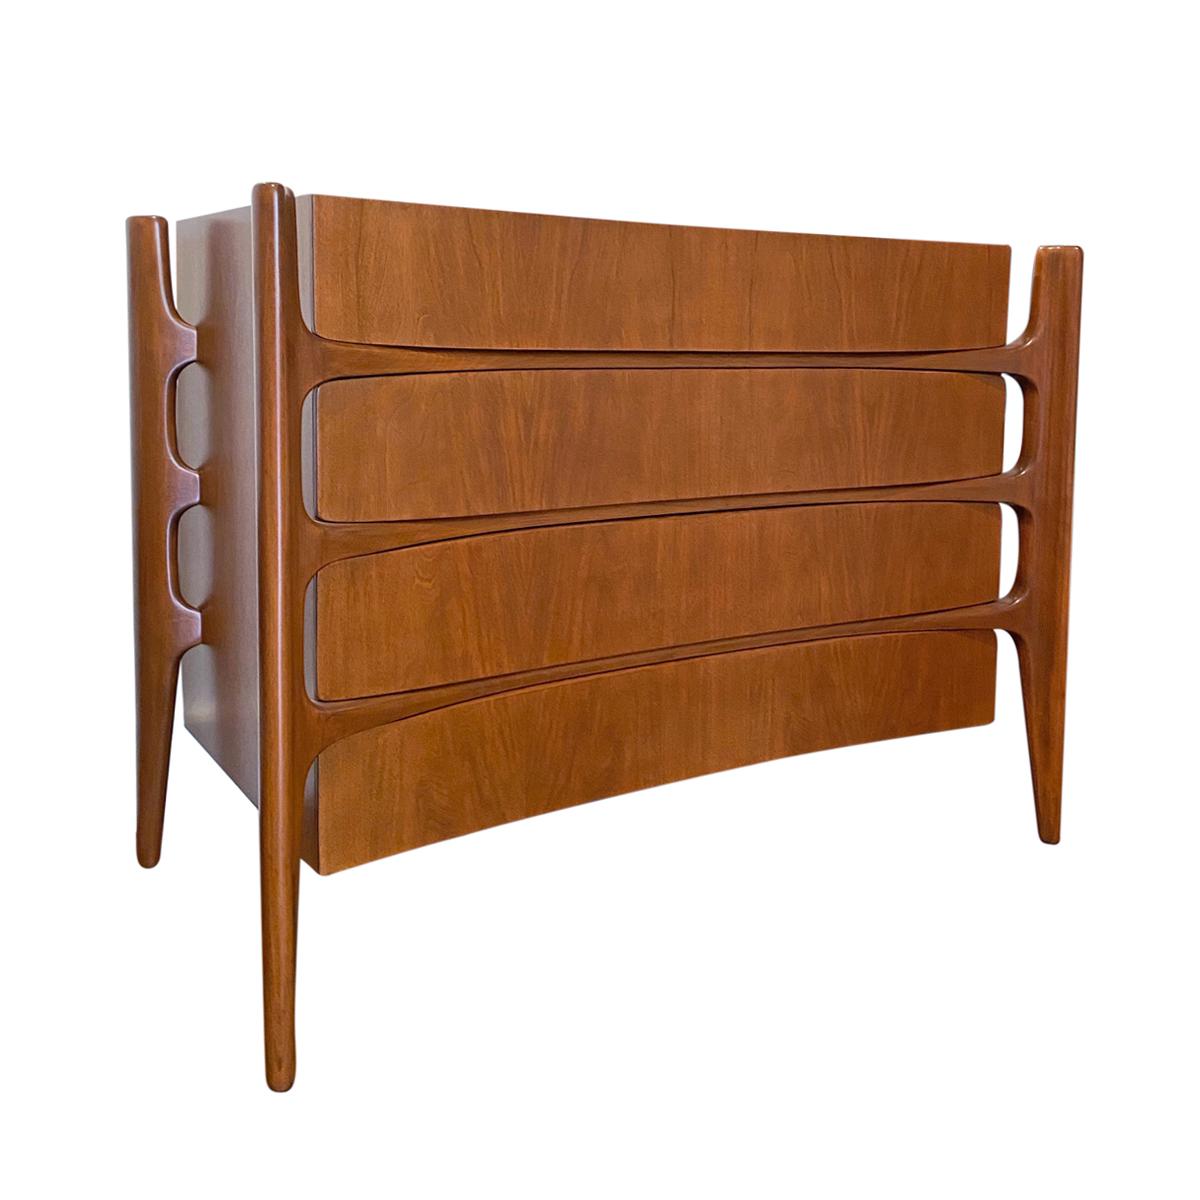 Sculptural Swedish walnut four-drawer dresser by William Hinn. Amazing design with curved concave case, extending into pegged legs which protrude like organic struts. Beautifully matched wood grain on drawer fronts. Marked Stiehl Furniture on side